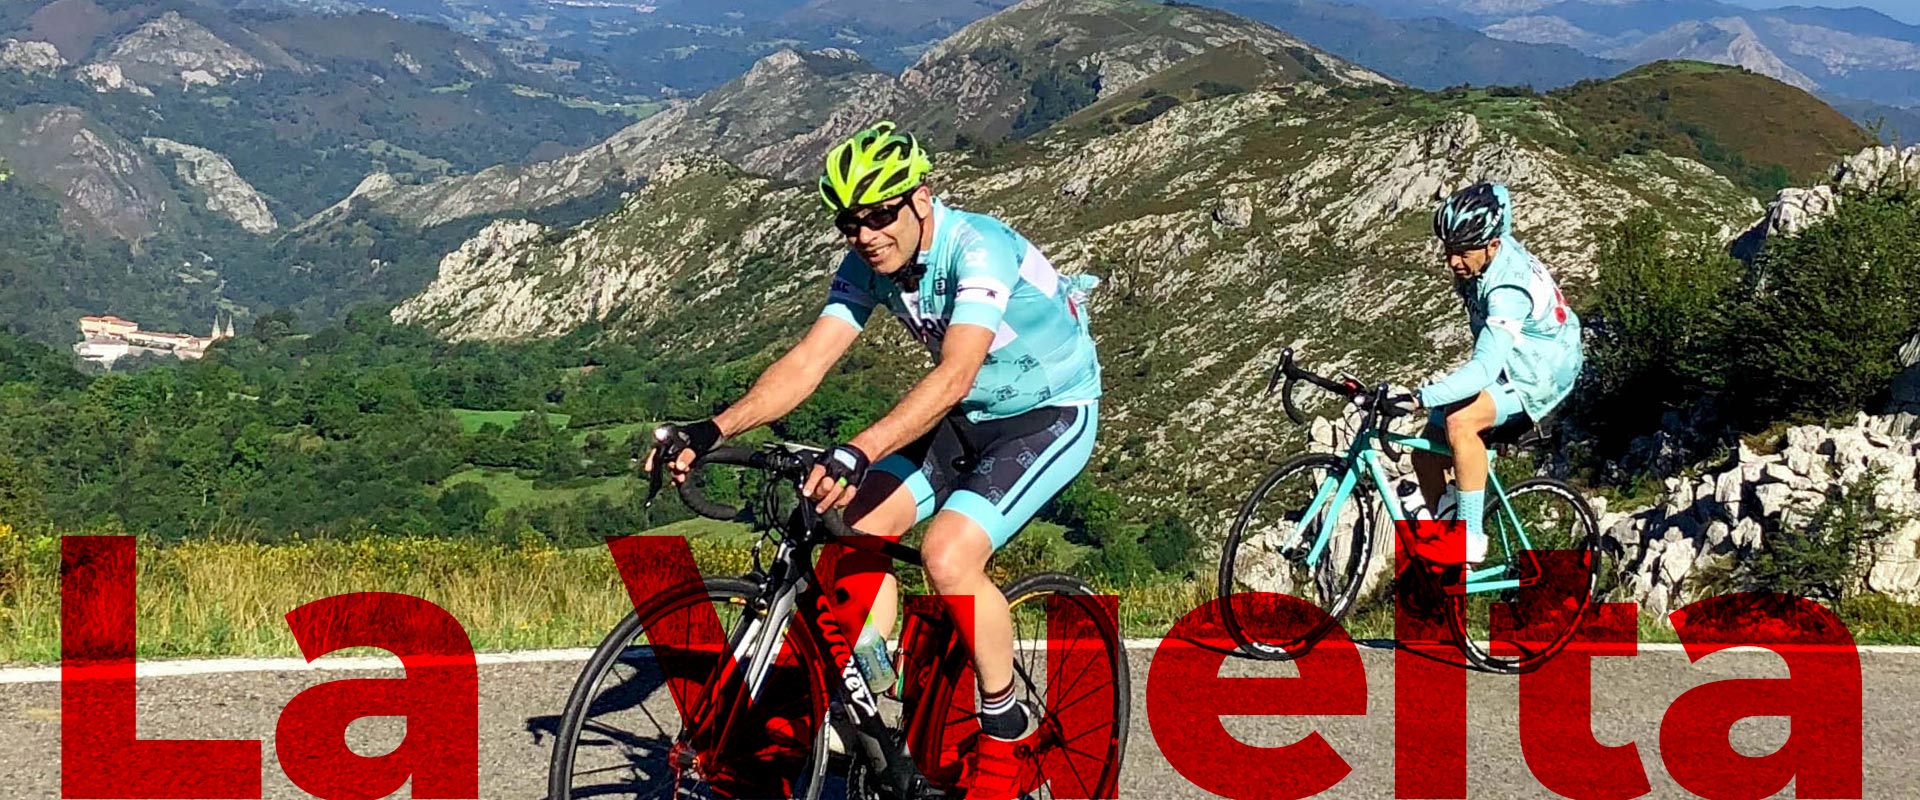 Spanish Climbs + La Vuelta with Topbike Tours - 2023 Cycling Holiday in Spain